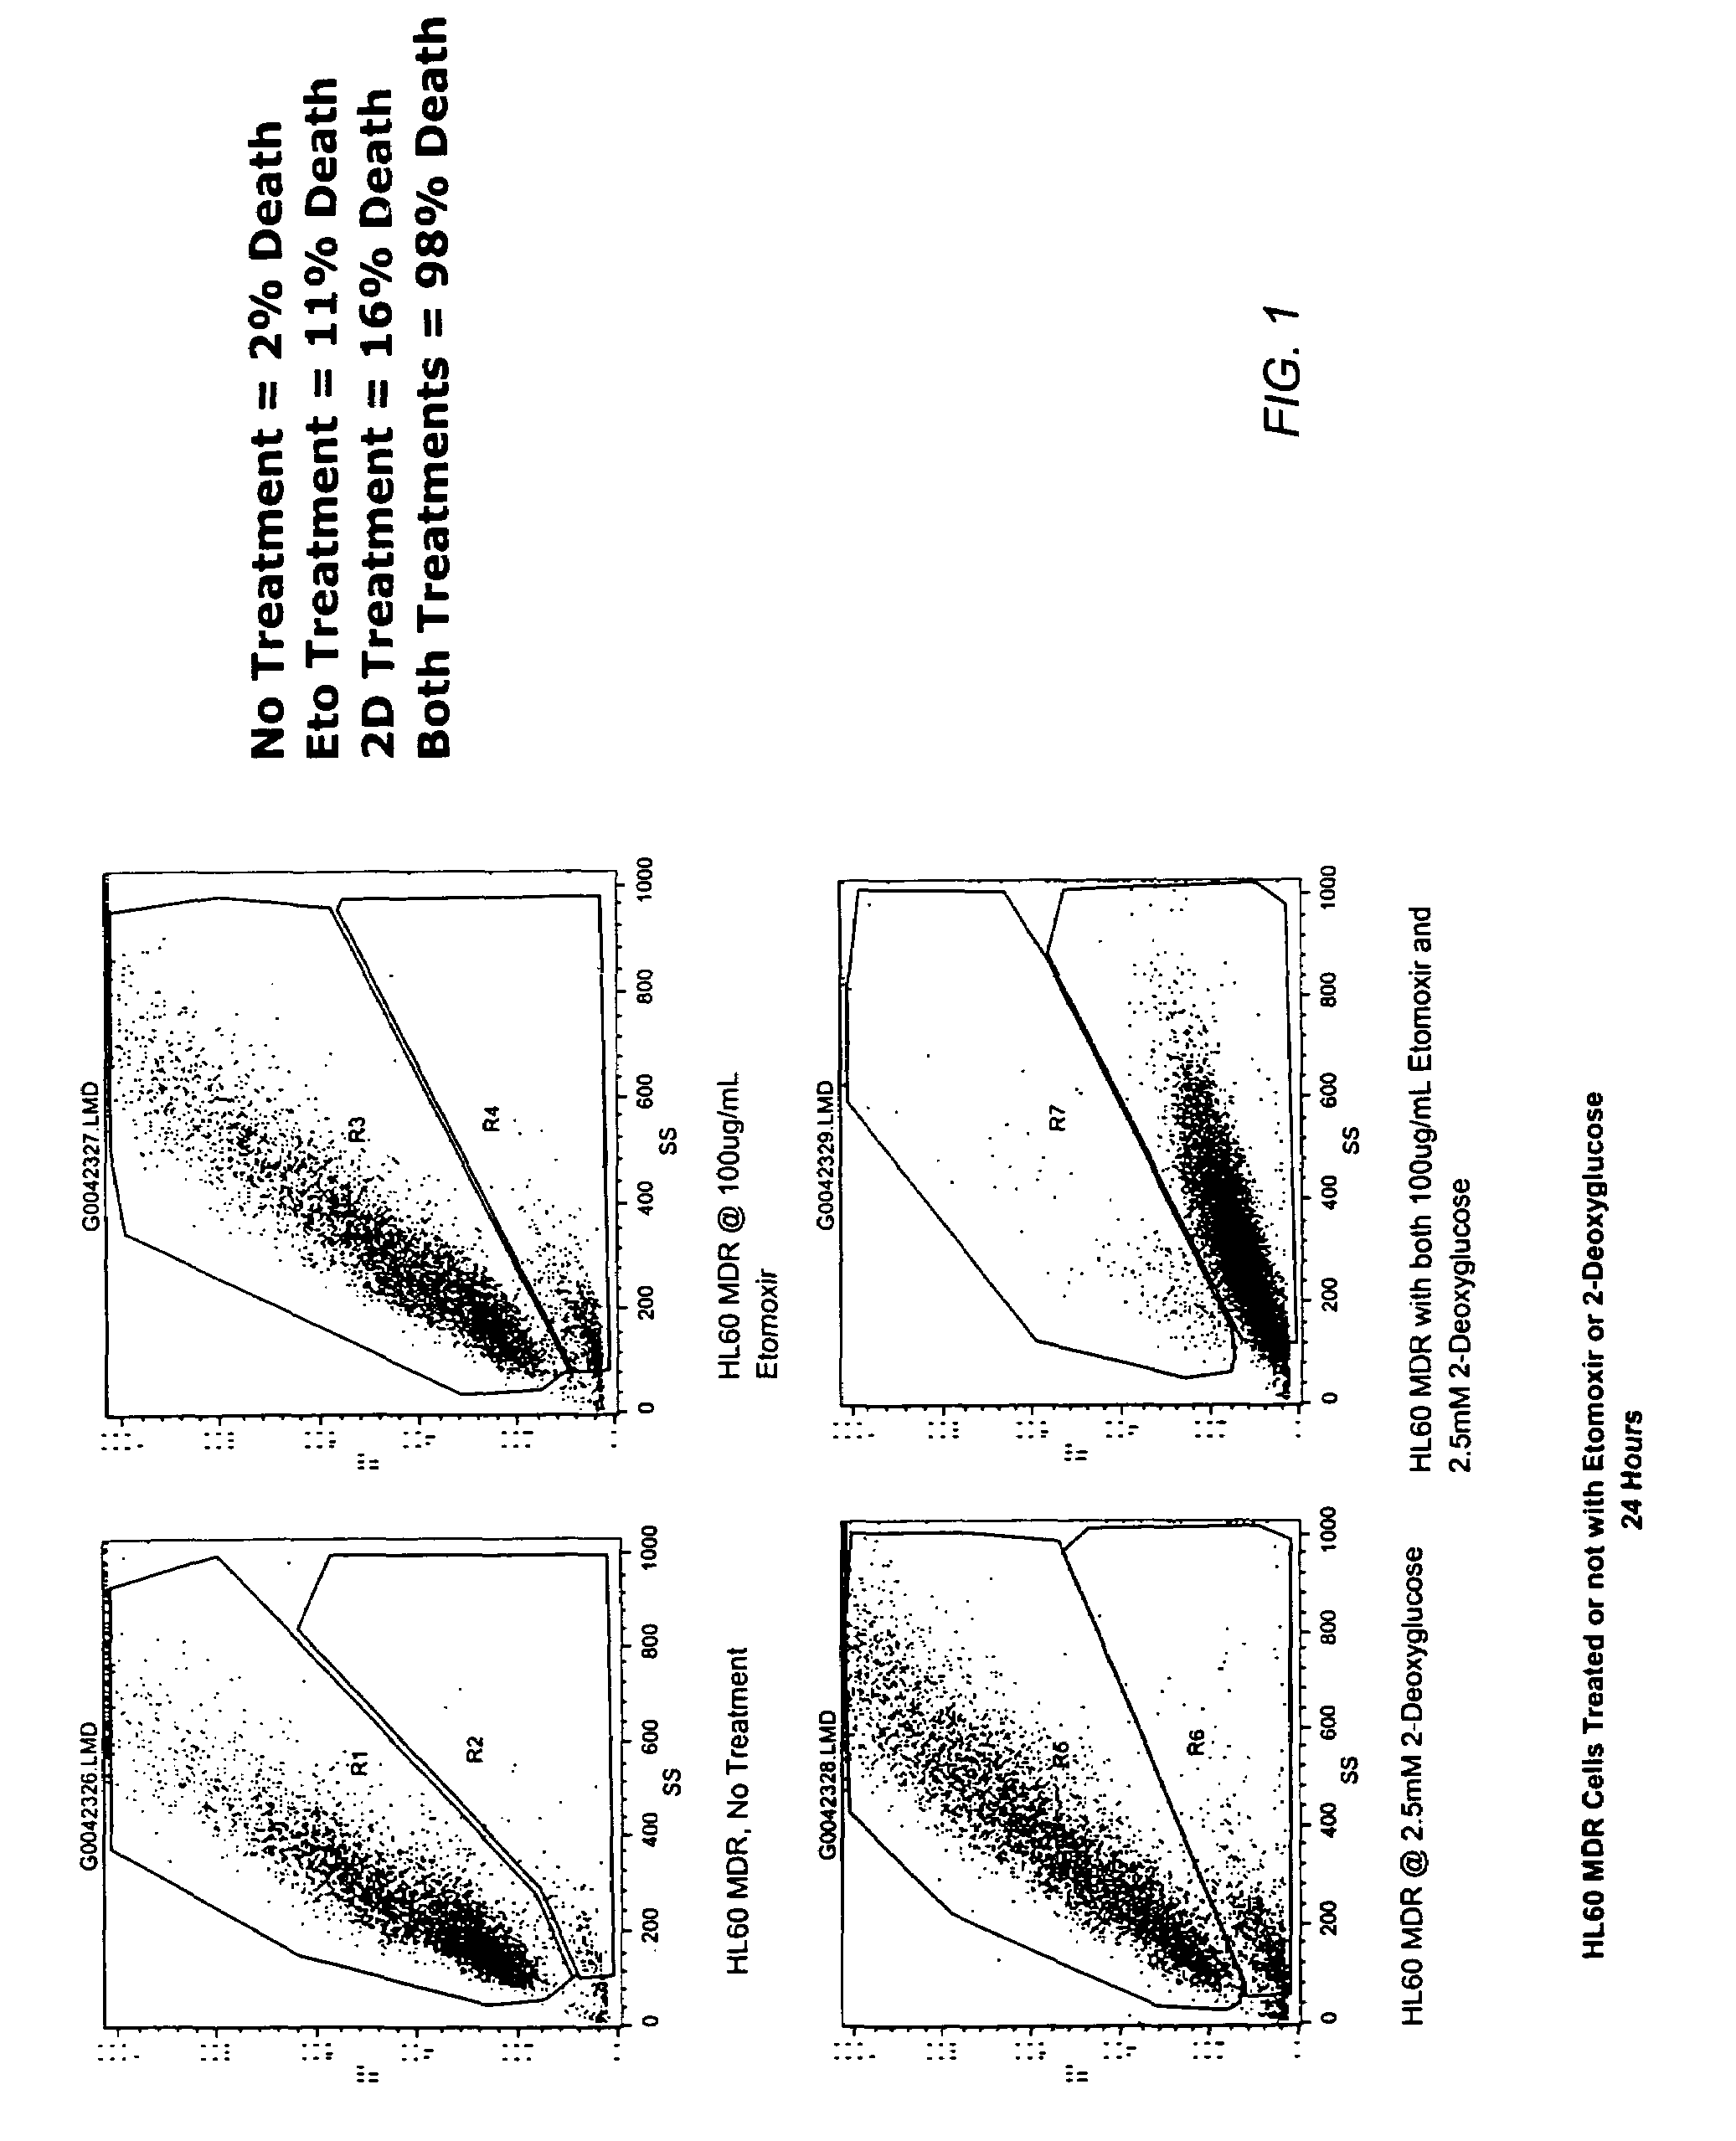 Methods for treating human proliferative diseases, with a combination of fatty acid metabolism inhibitors and glycolytic inhibitors